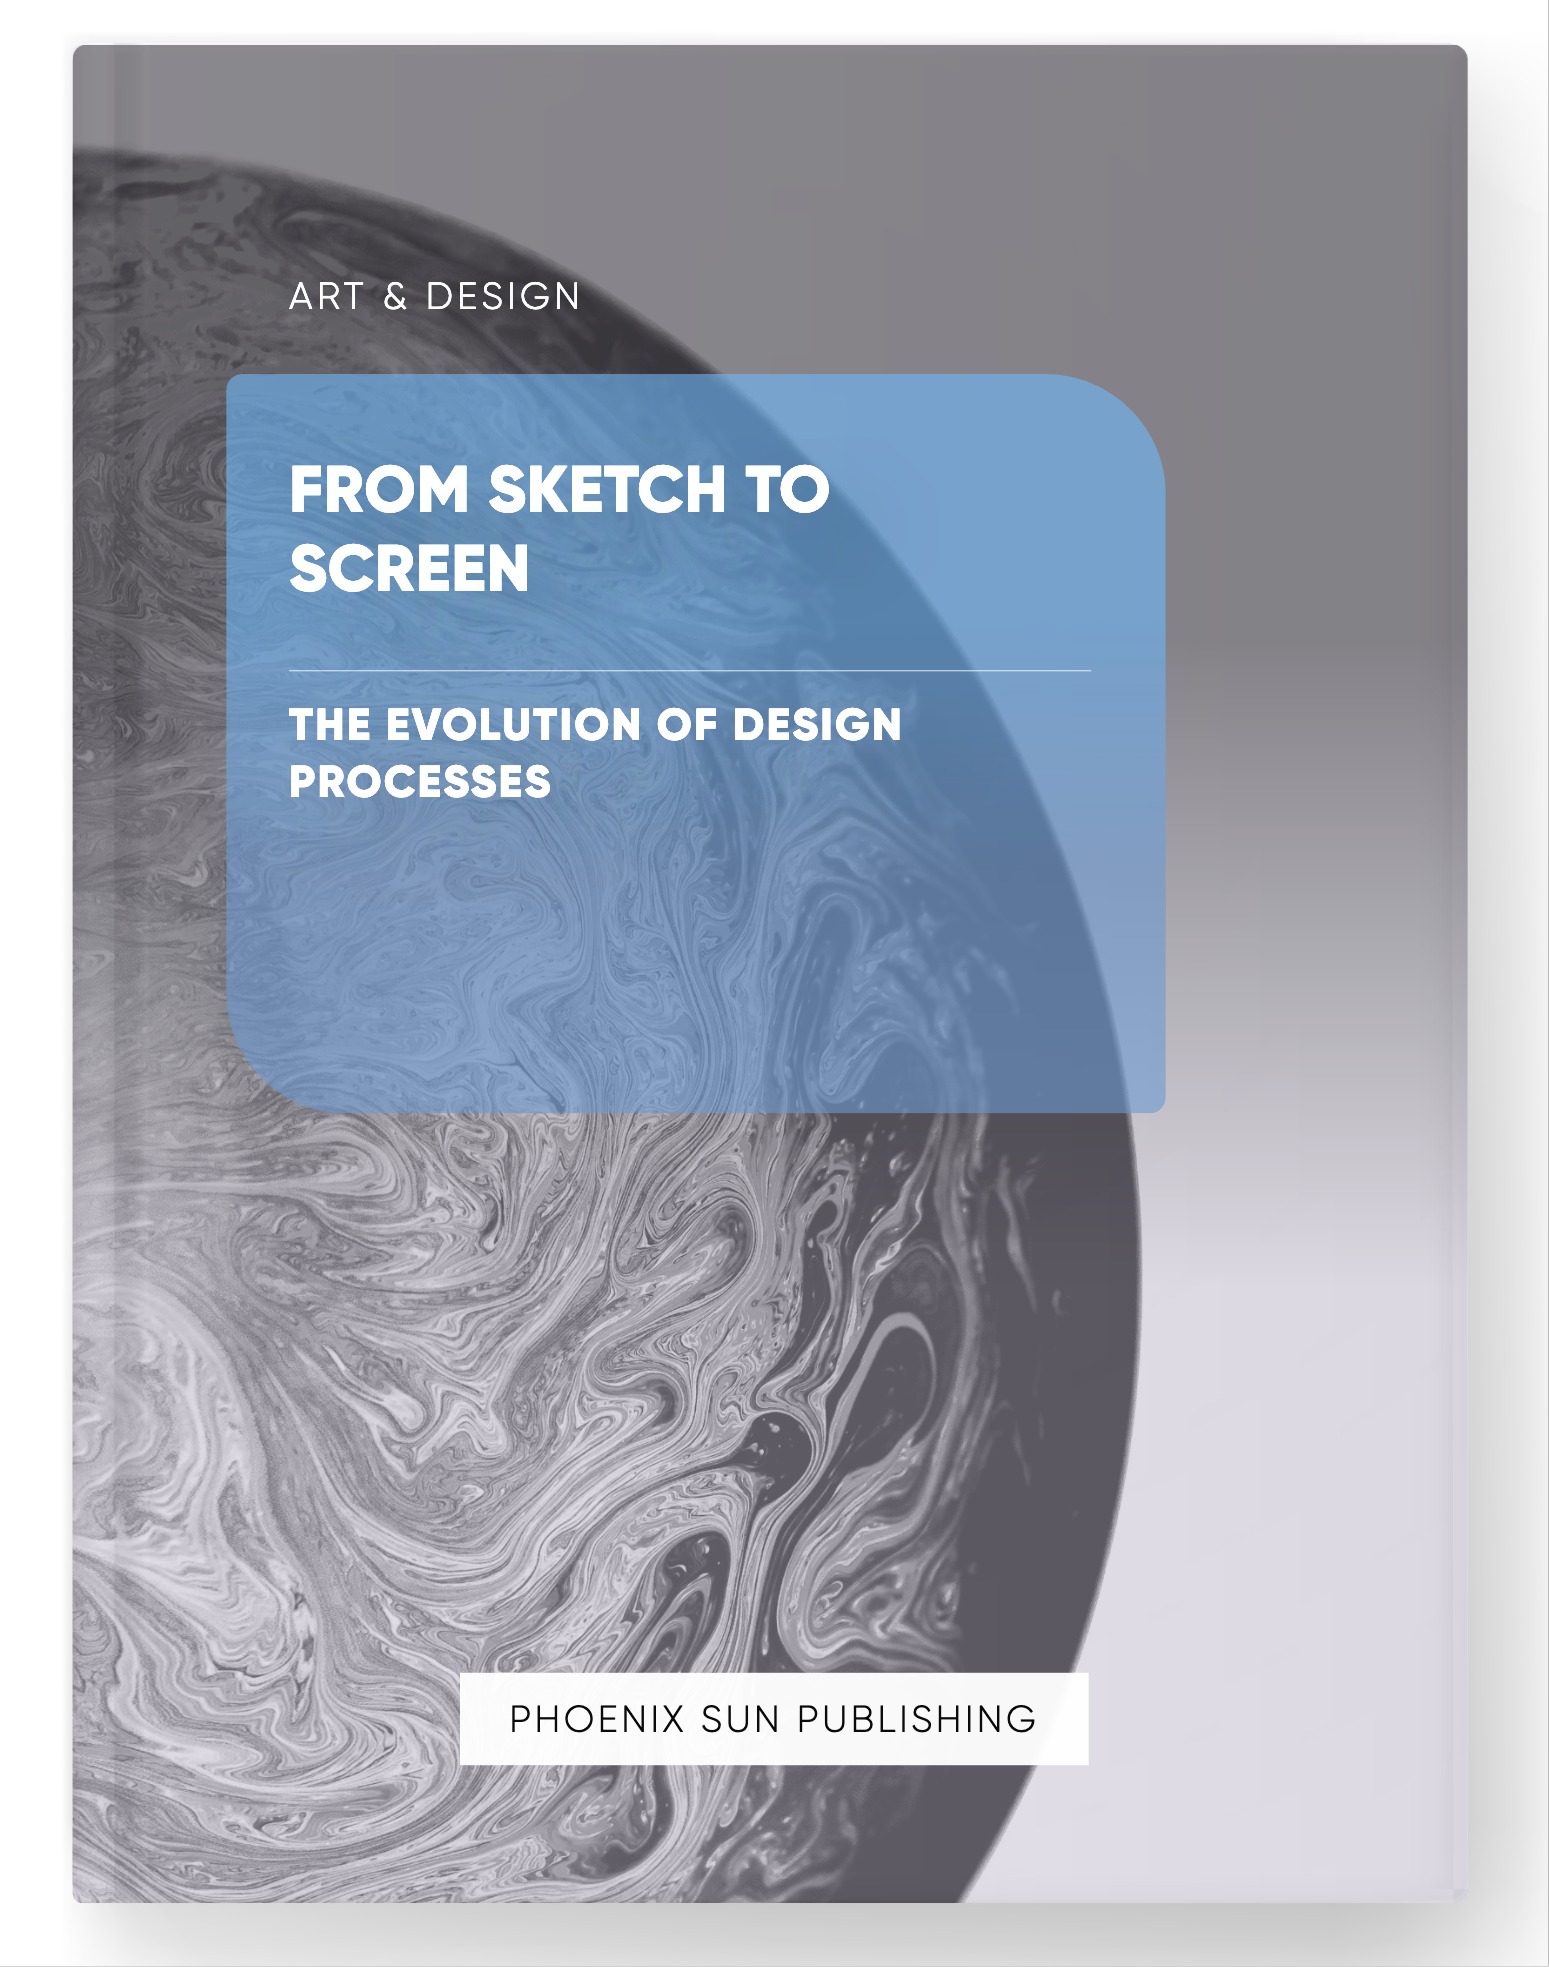 From Sketch to Screen – The Evolution of Design Processes